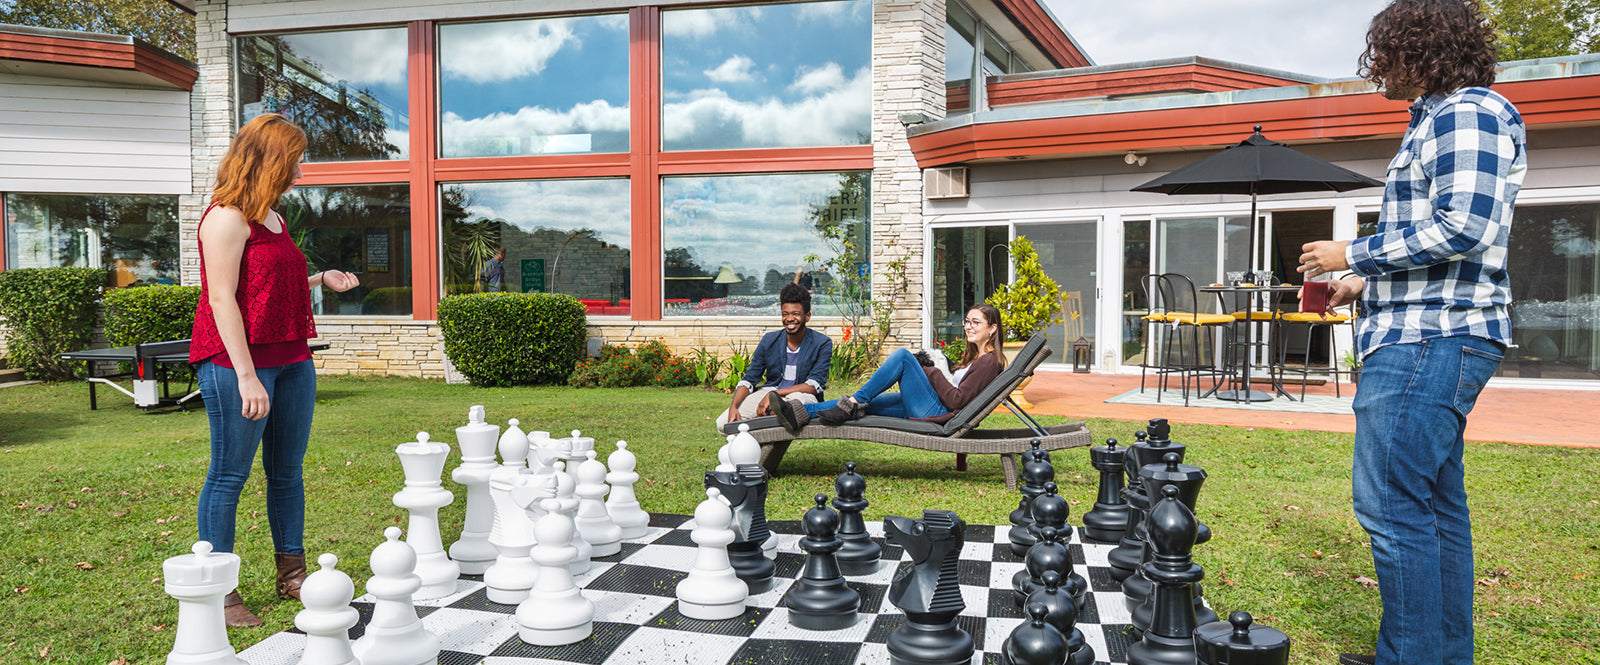 Young couples playing chess with a giant chess set outside in a backyard.